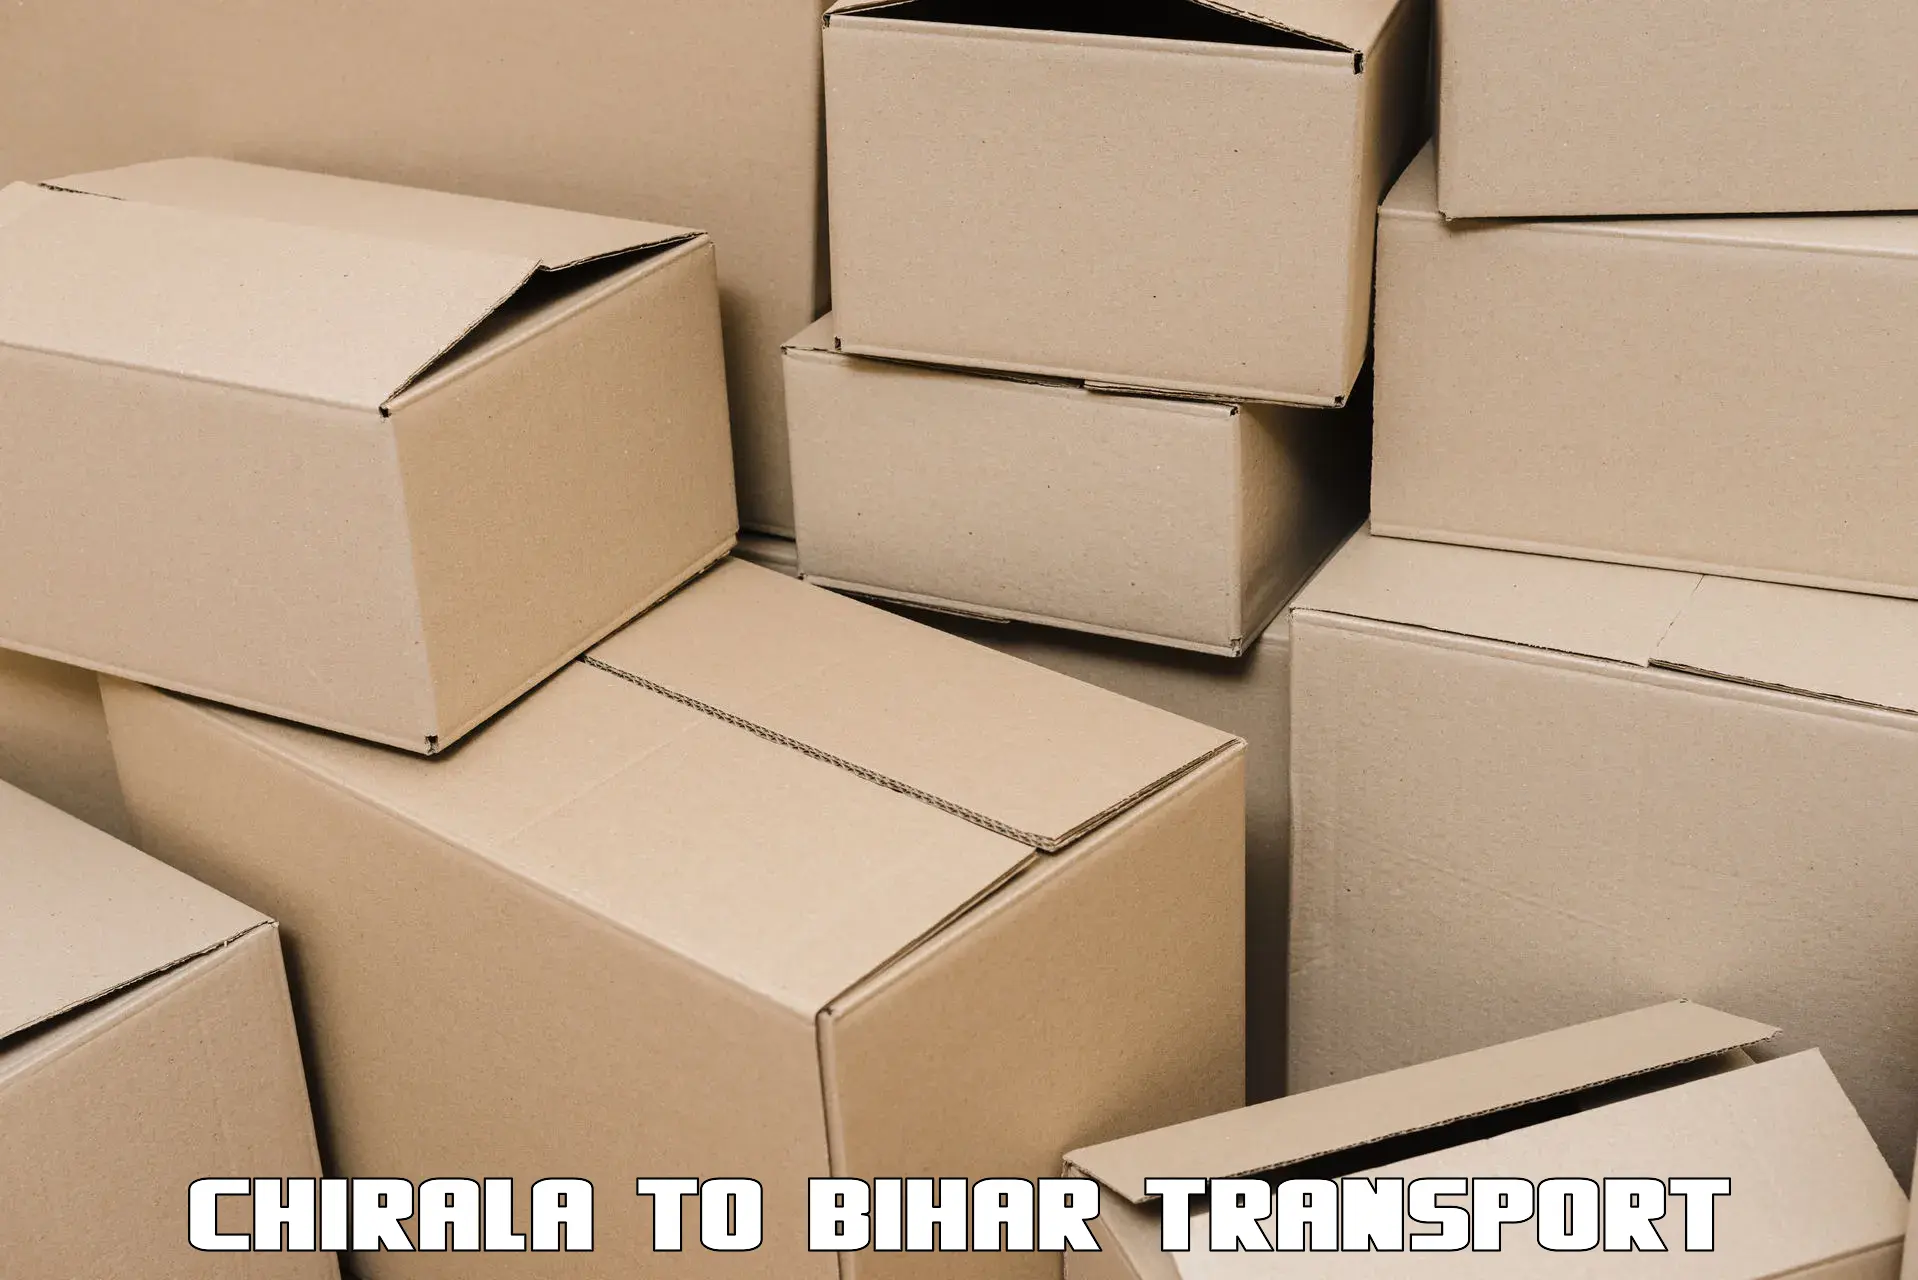 Best transport services in India Chirala to Barachati